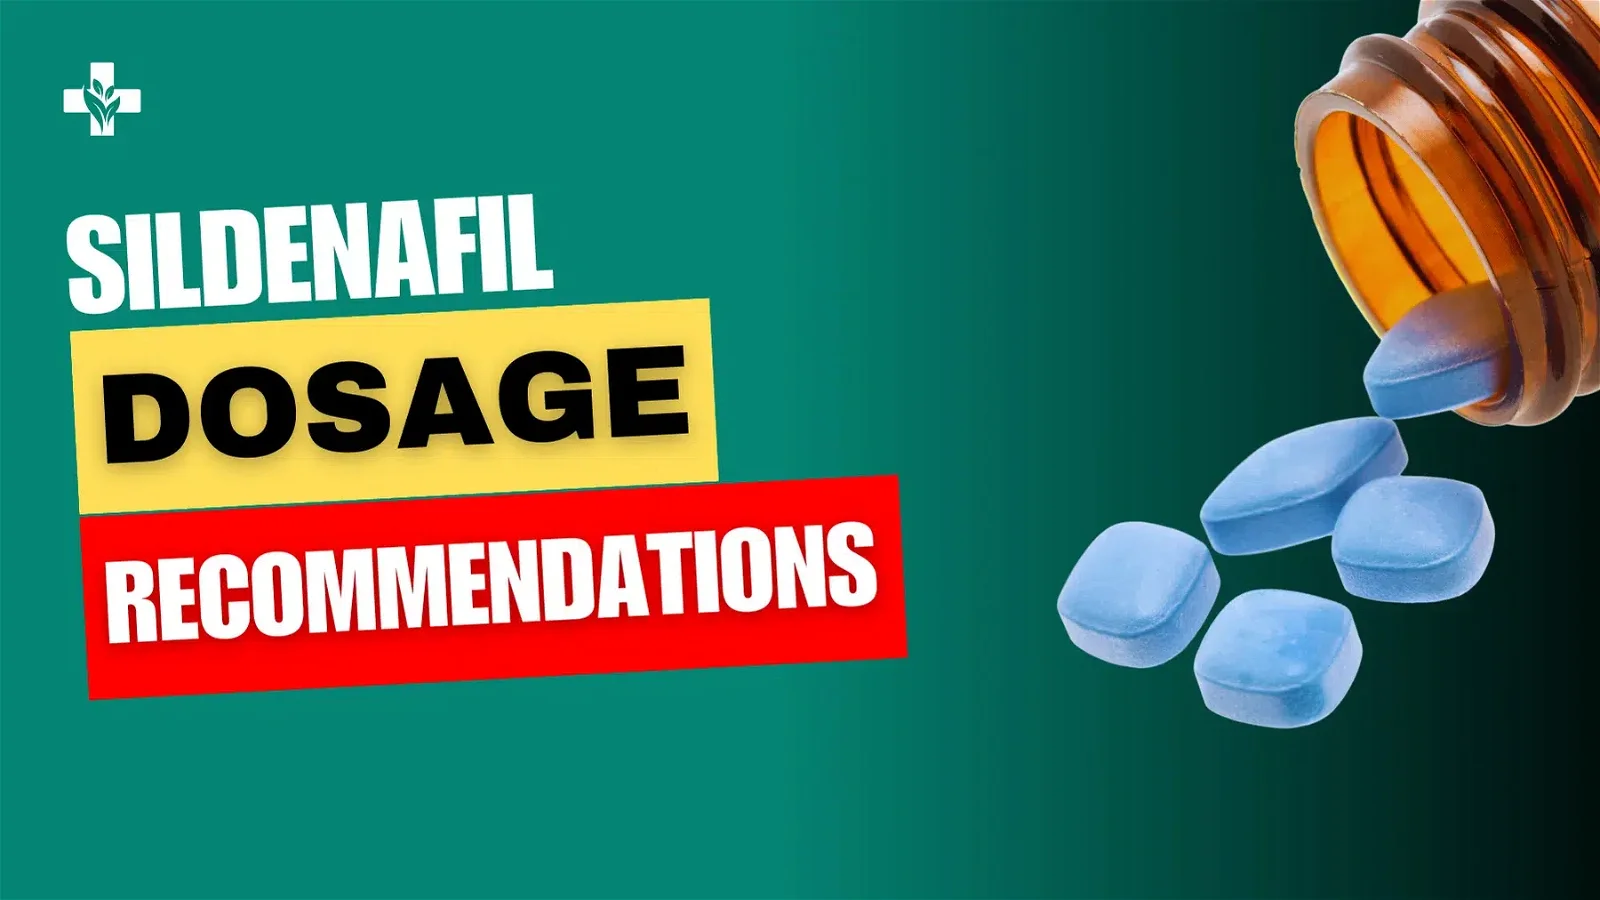 Recommended sildenafil dosage for alleviating various issues